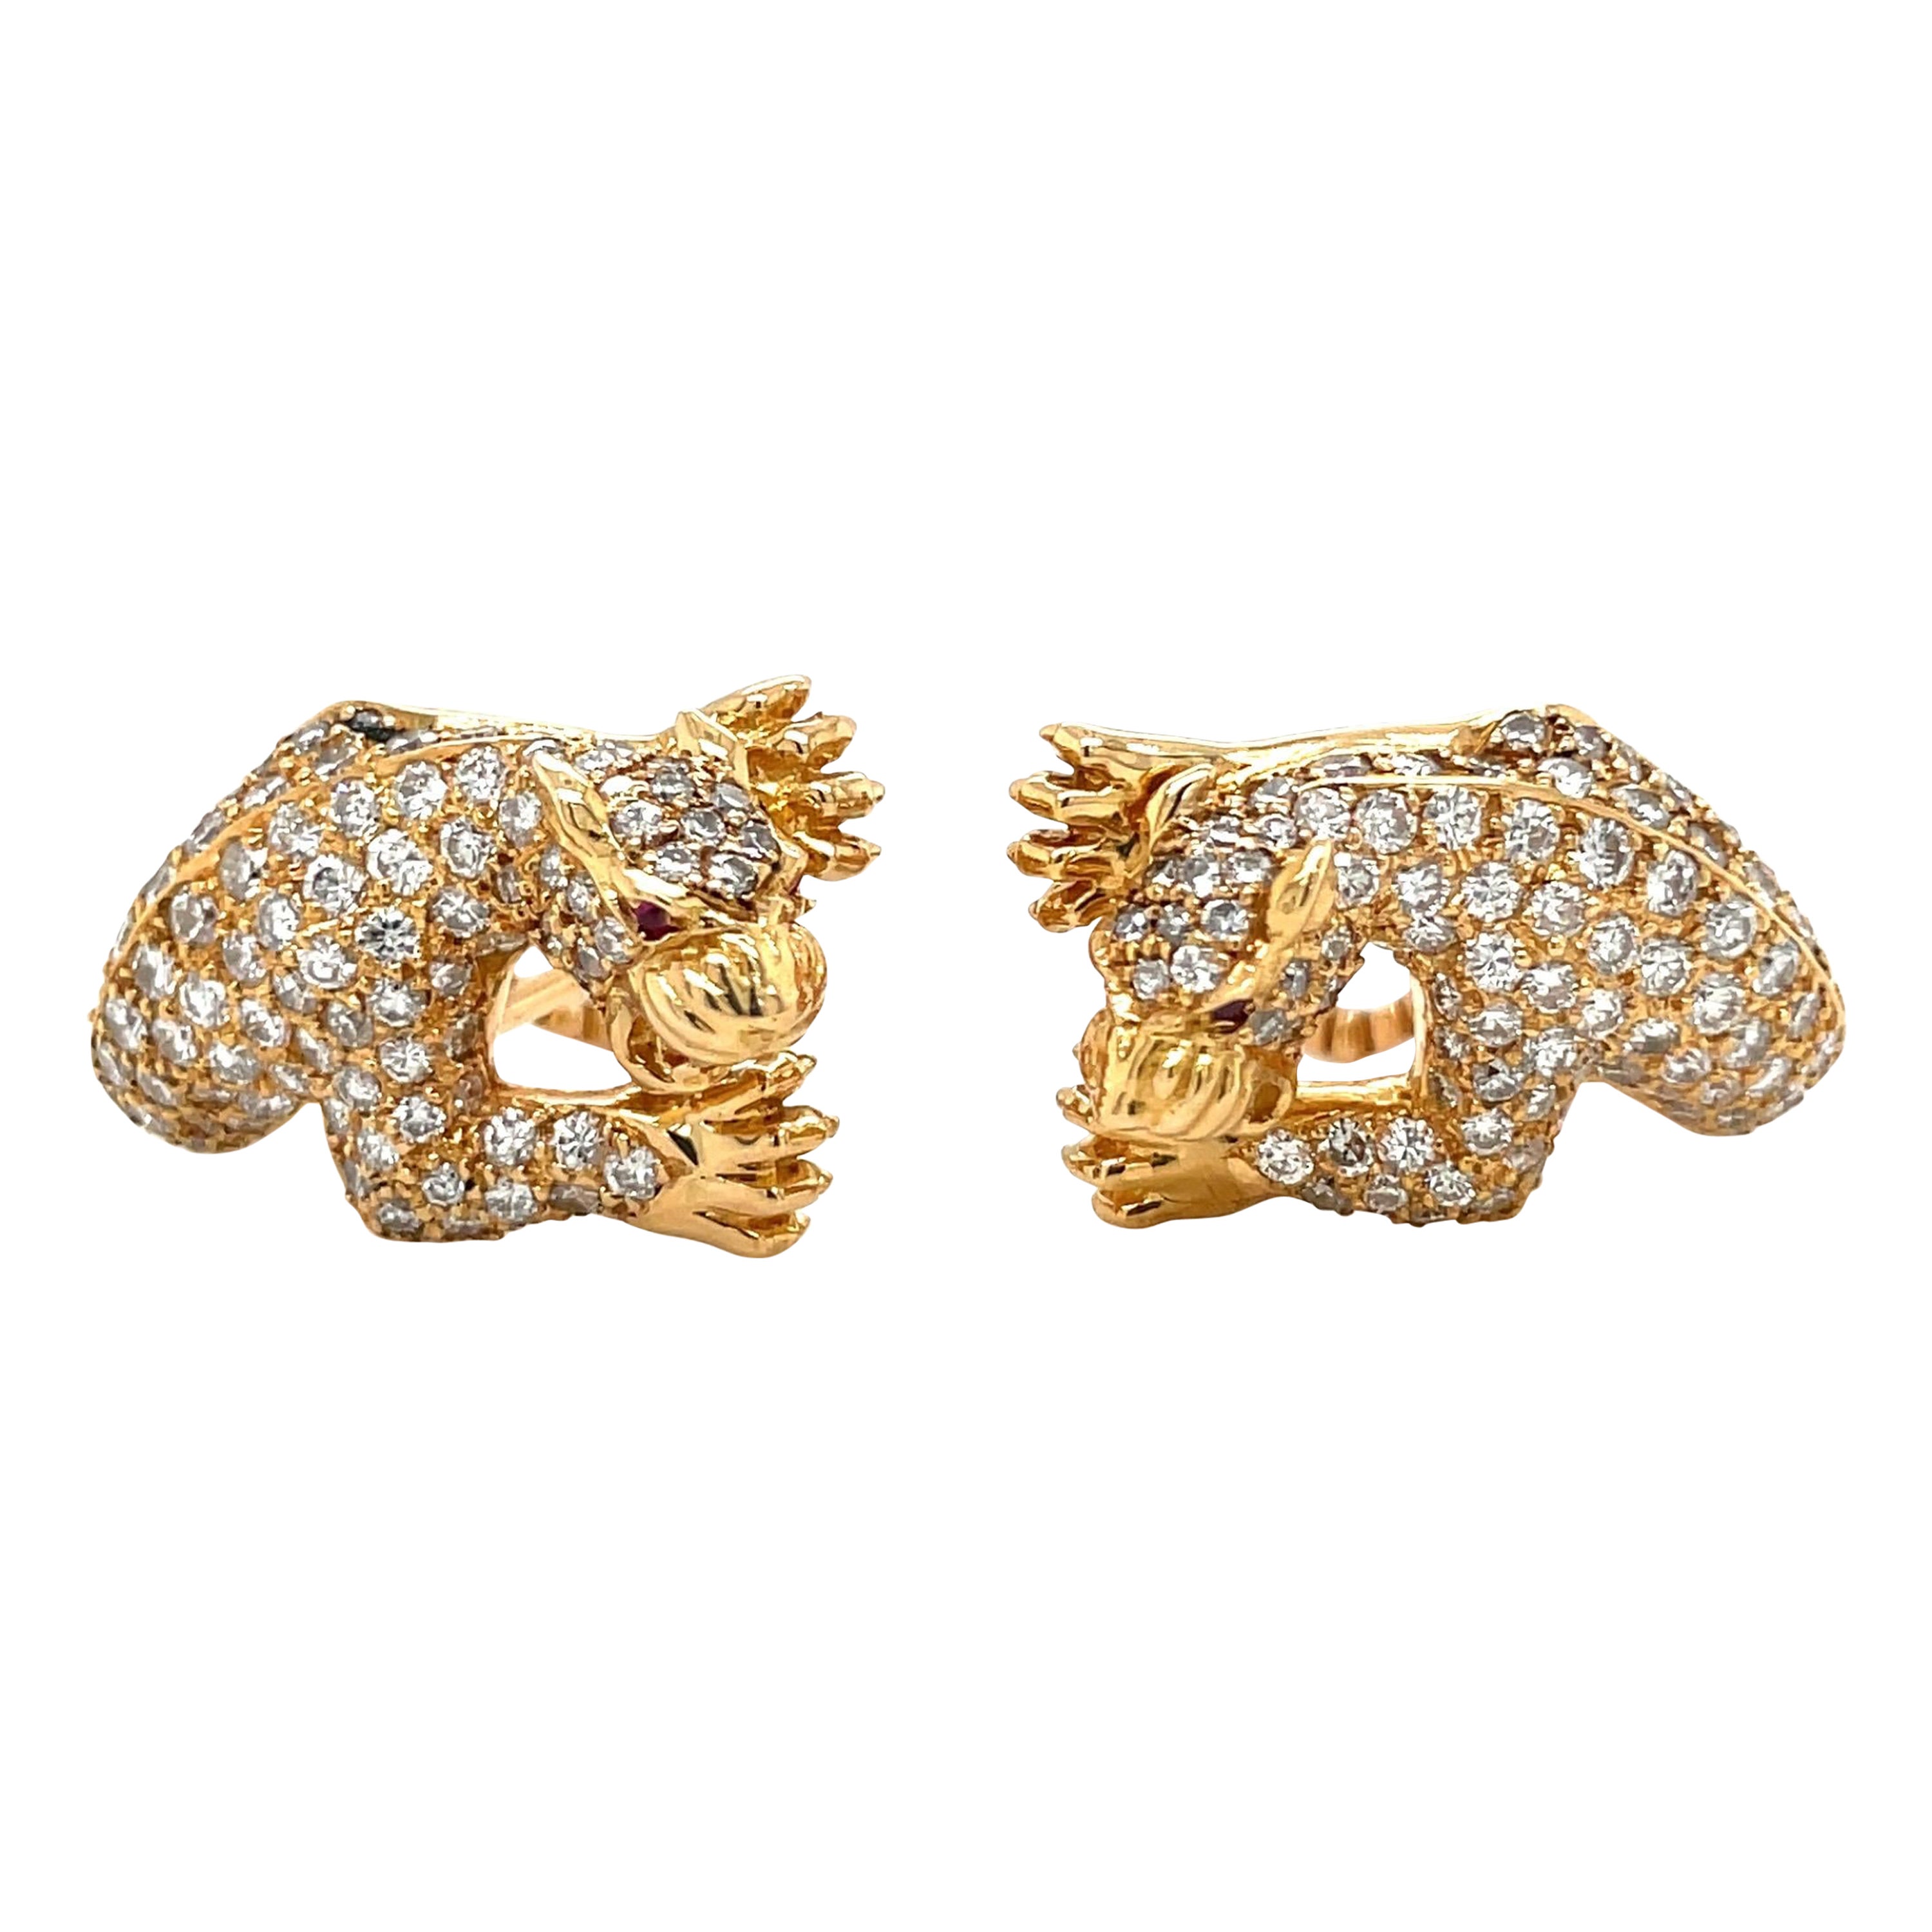 Carrera Y Carrera 18 KT Yellow Gold 2.75 Ct. Full Pave Diamond Panther Earrings For Sale